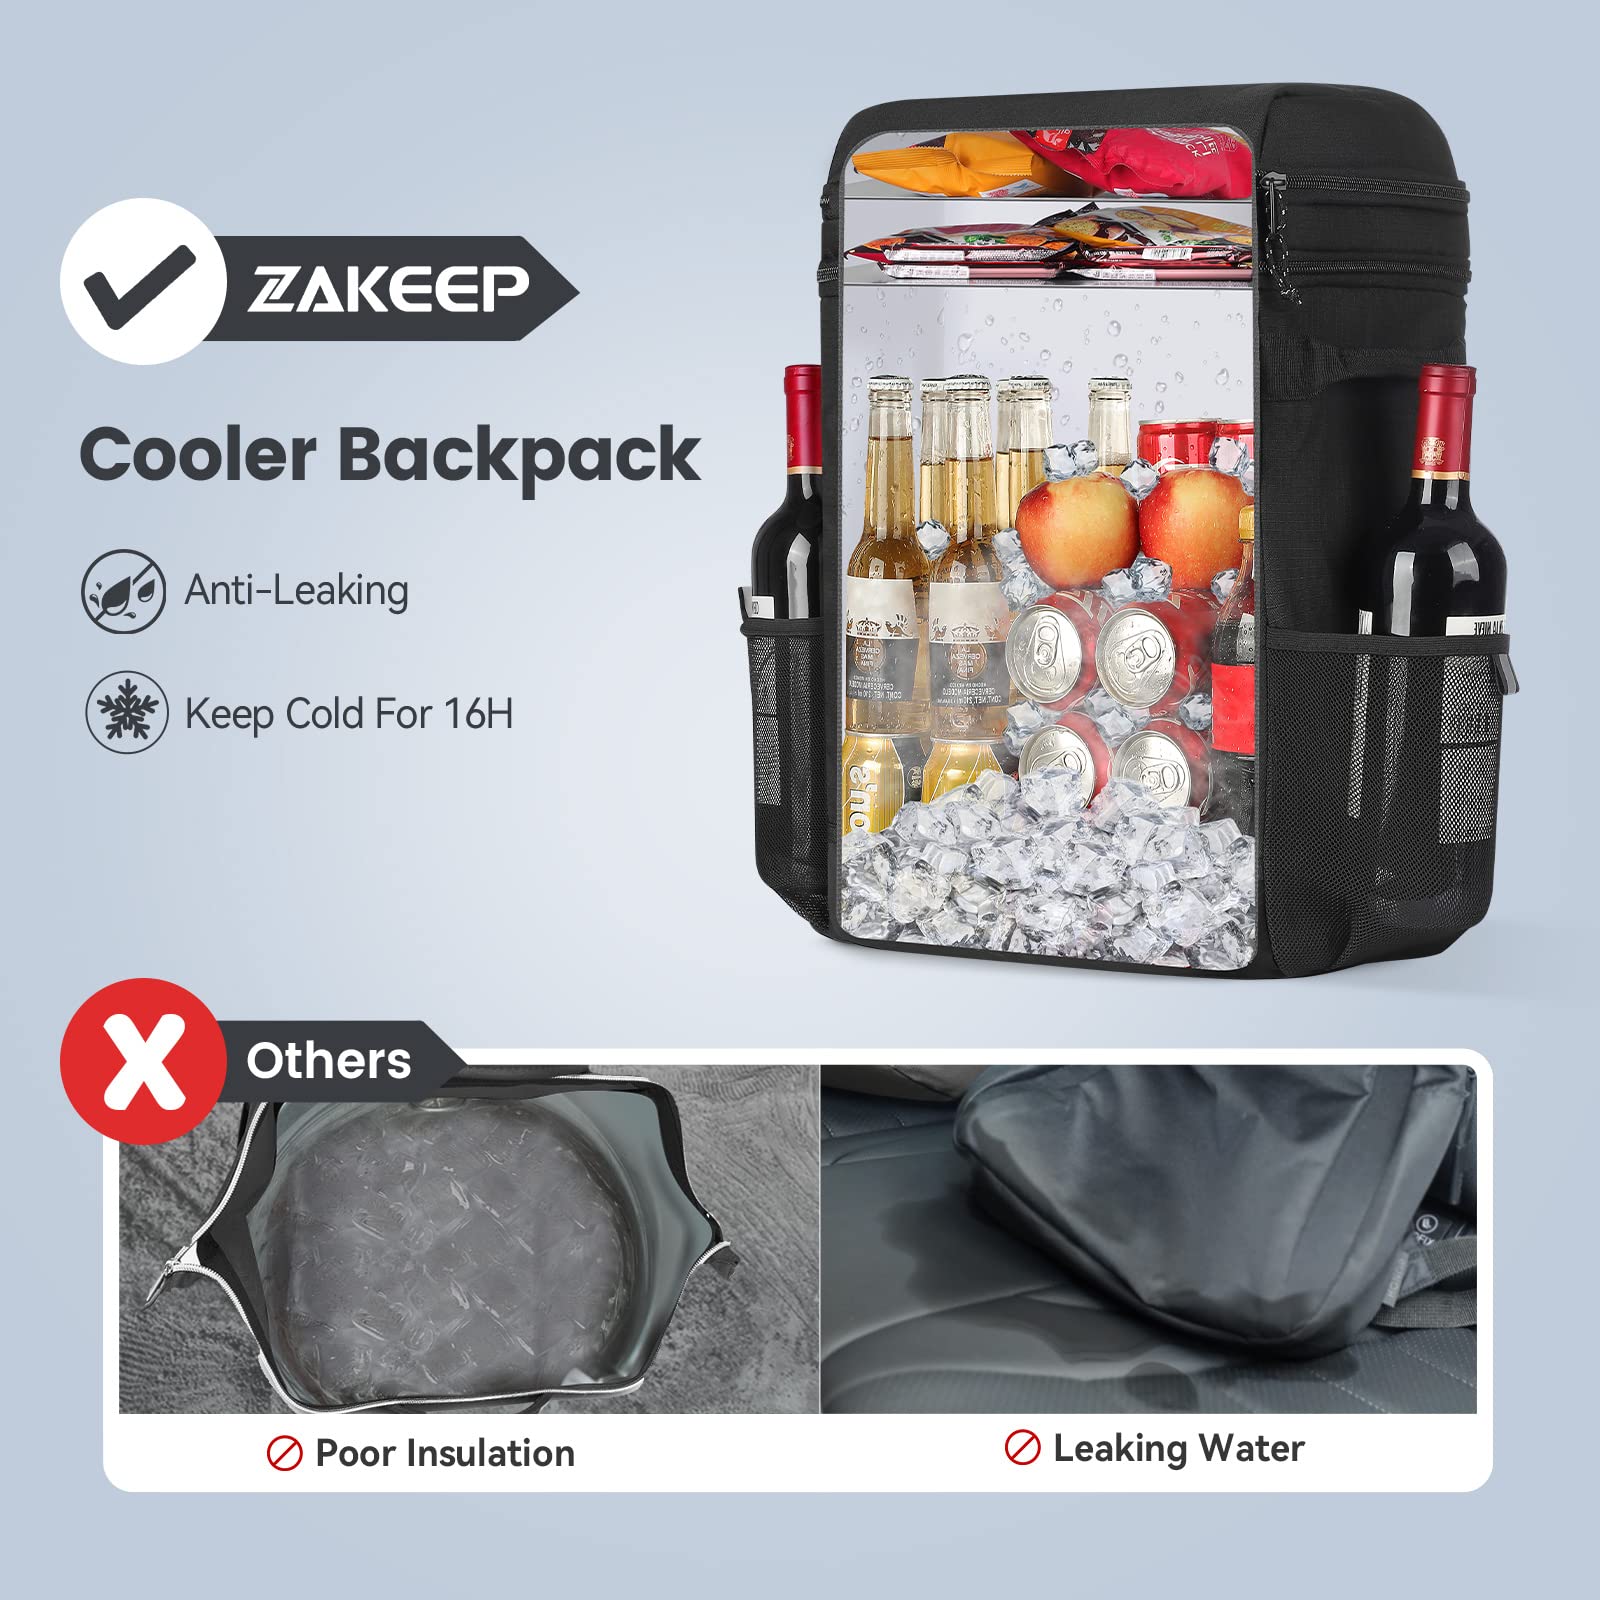 ZAKEEP Cooler Backpack, 36 Cans Multifunctional Leakproof Cooler Backpack with Padded Top Handle, Mesh Pocket for Camping BBQ